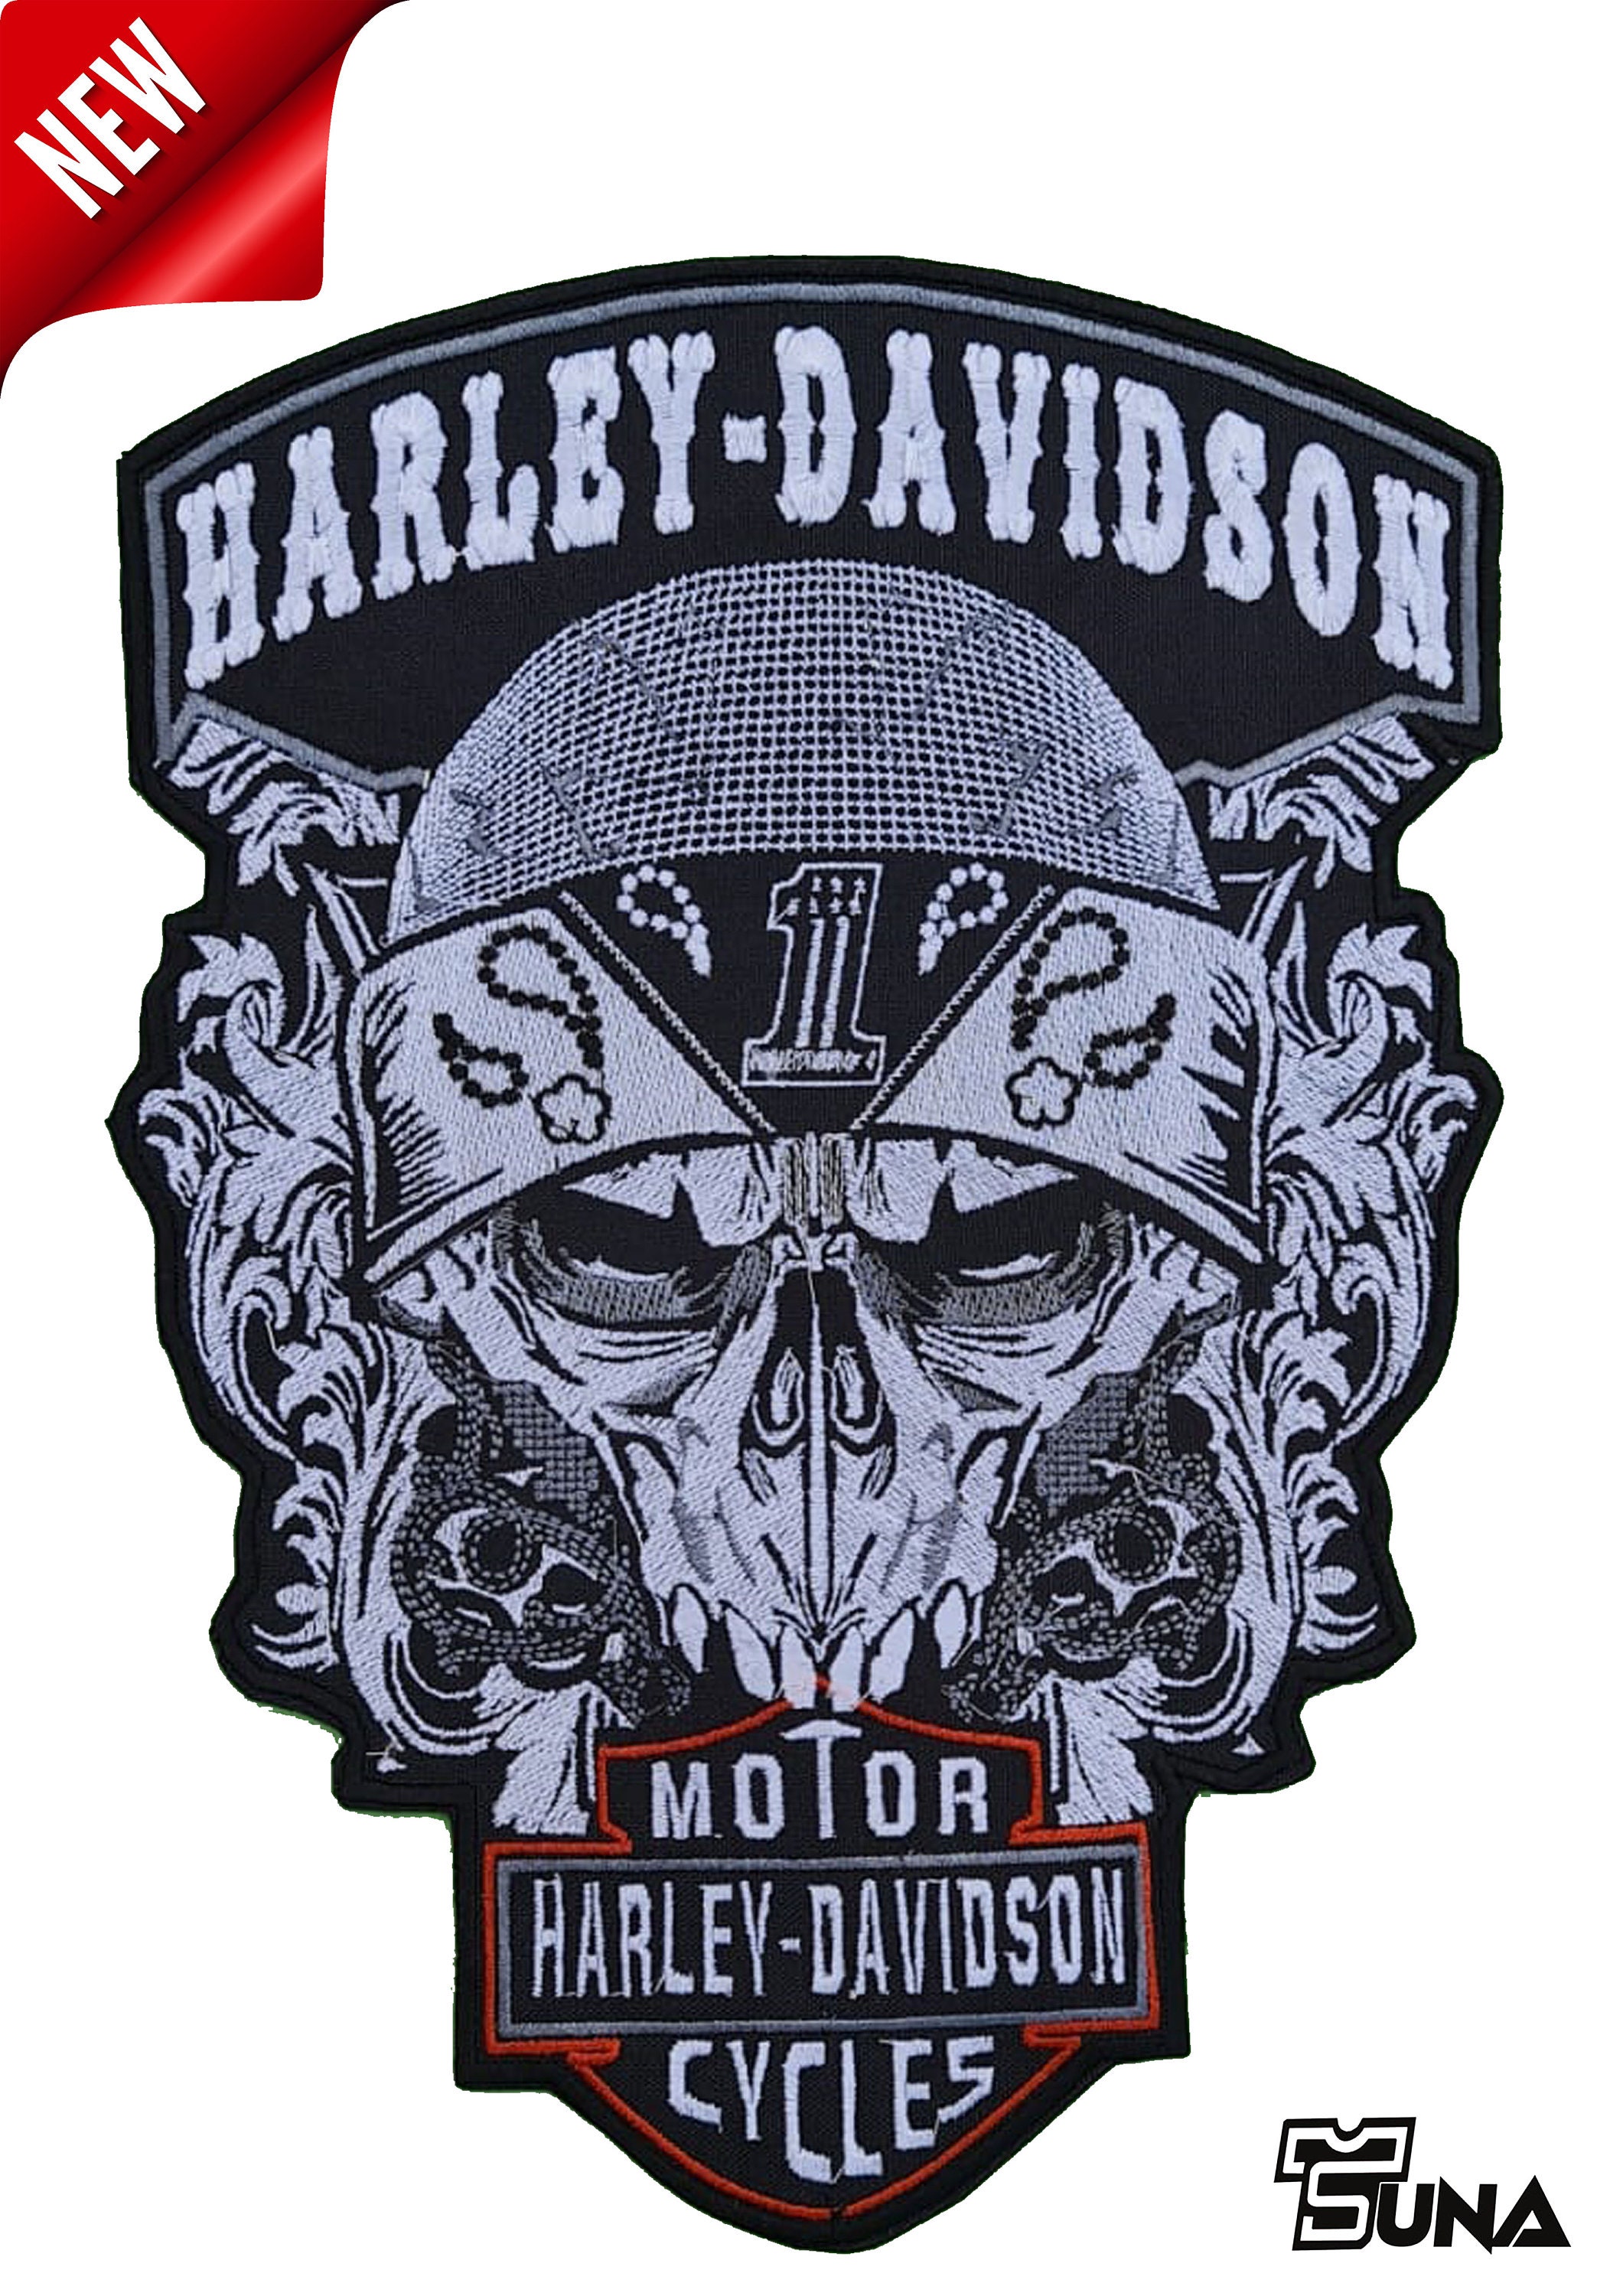 Harley Davidson - Patch - Back Patches - Patch Keychains Stickers - giga- patch.com - Biggest Patch Shop worldwide